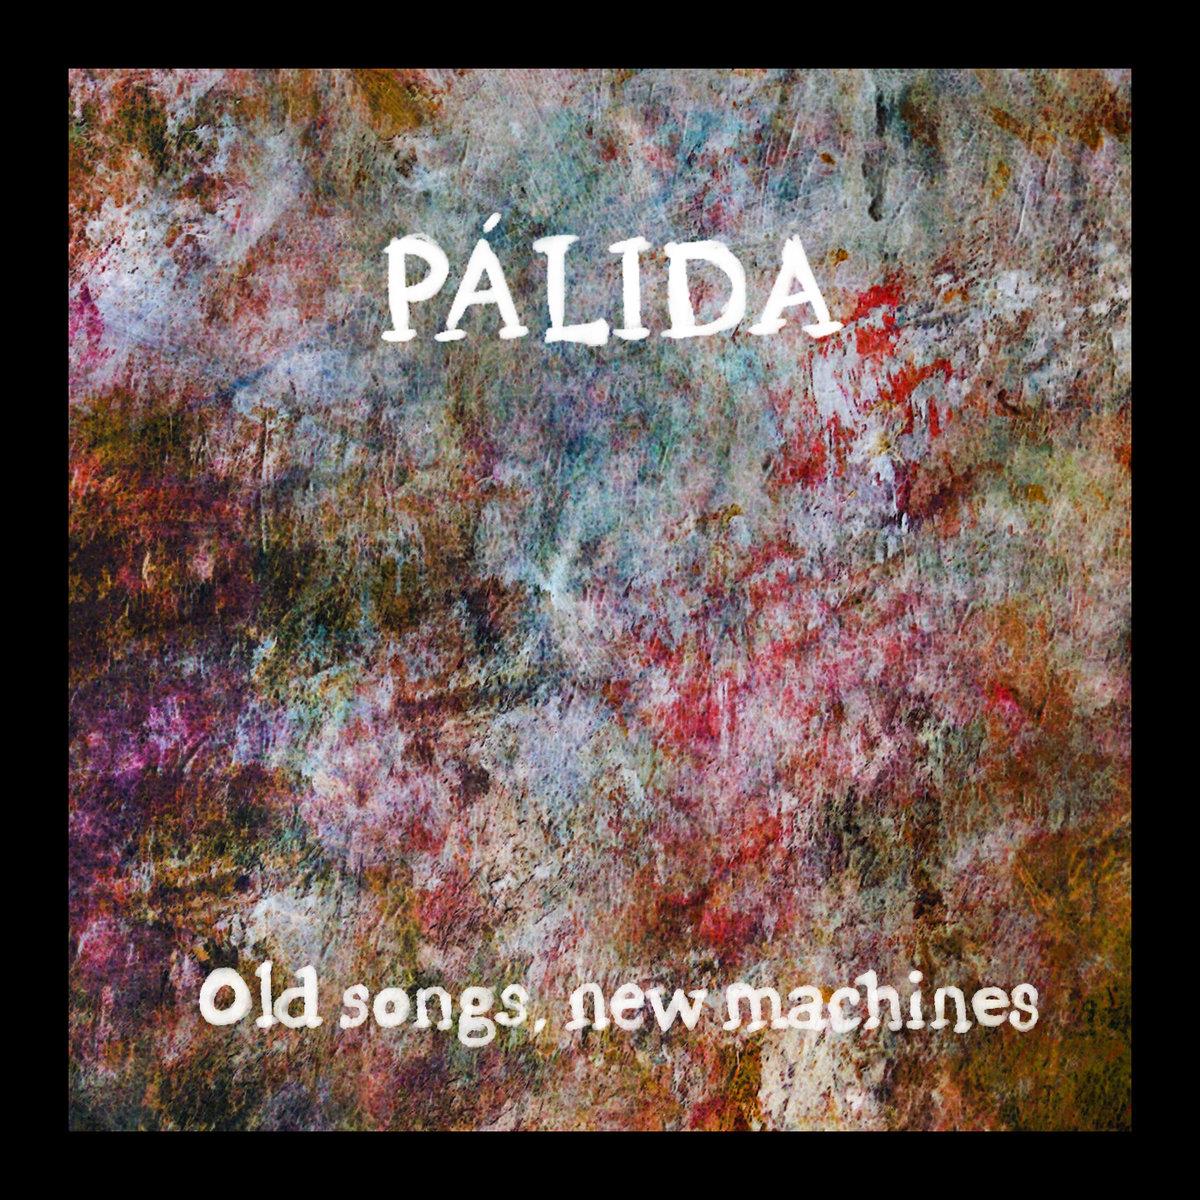 Old songs, new machines